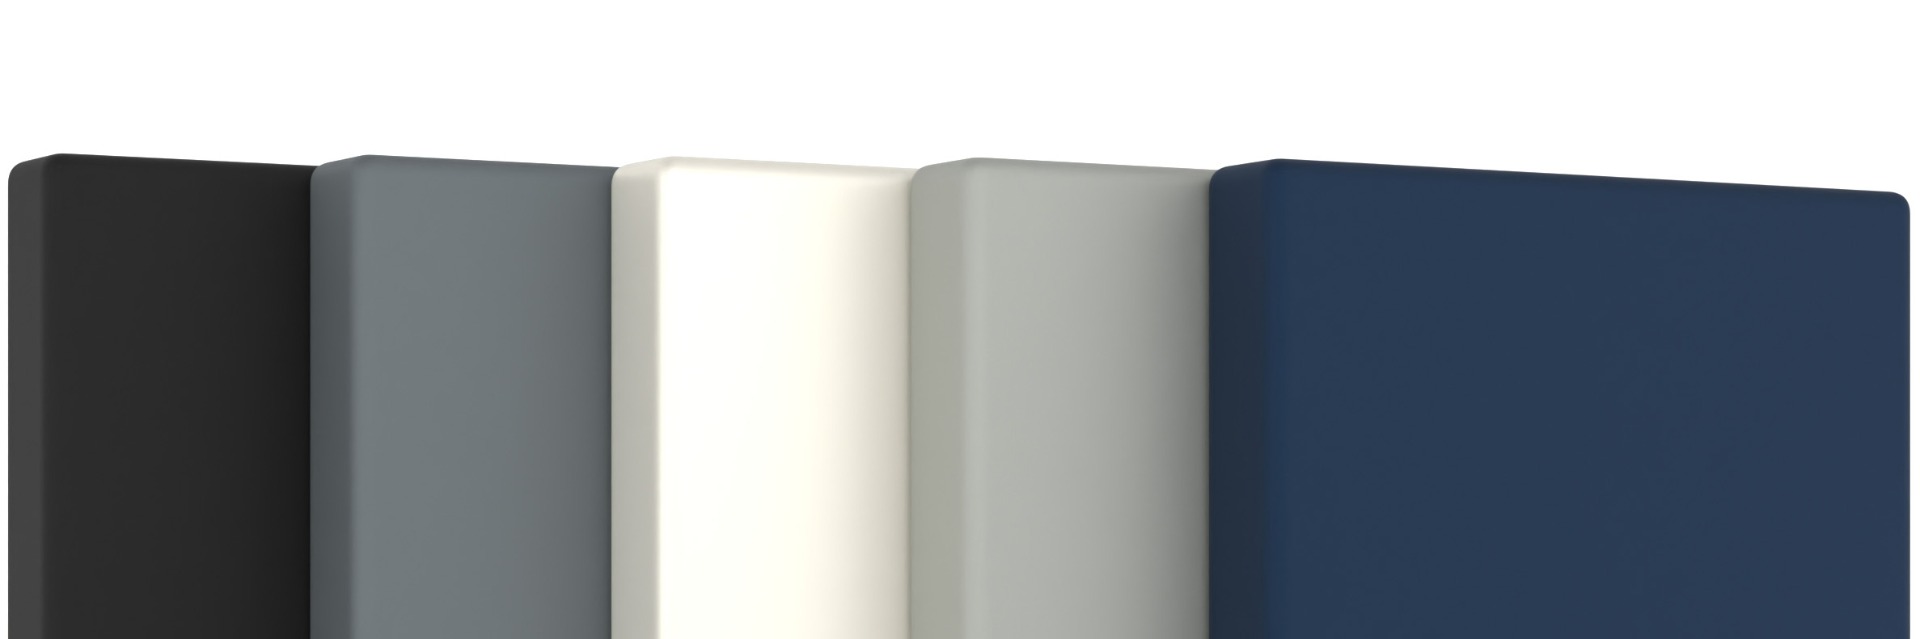 Soft Touch Lacquer – The Latest Advancement in Wall & Cabinet Finishes